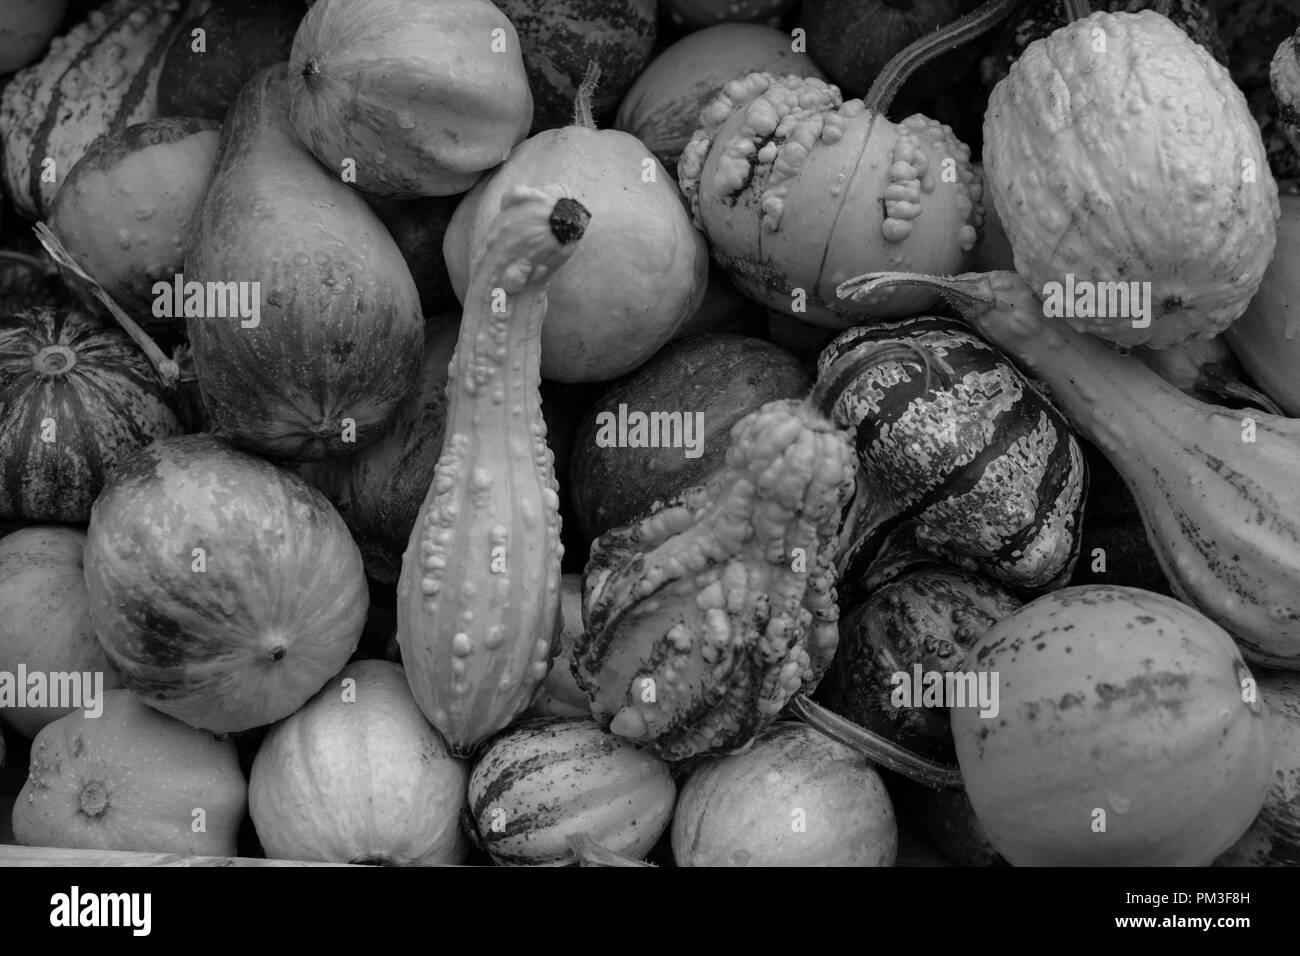 Closeup of pumpkins on a stand Stock Photo